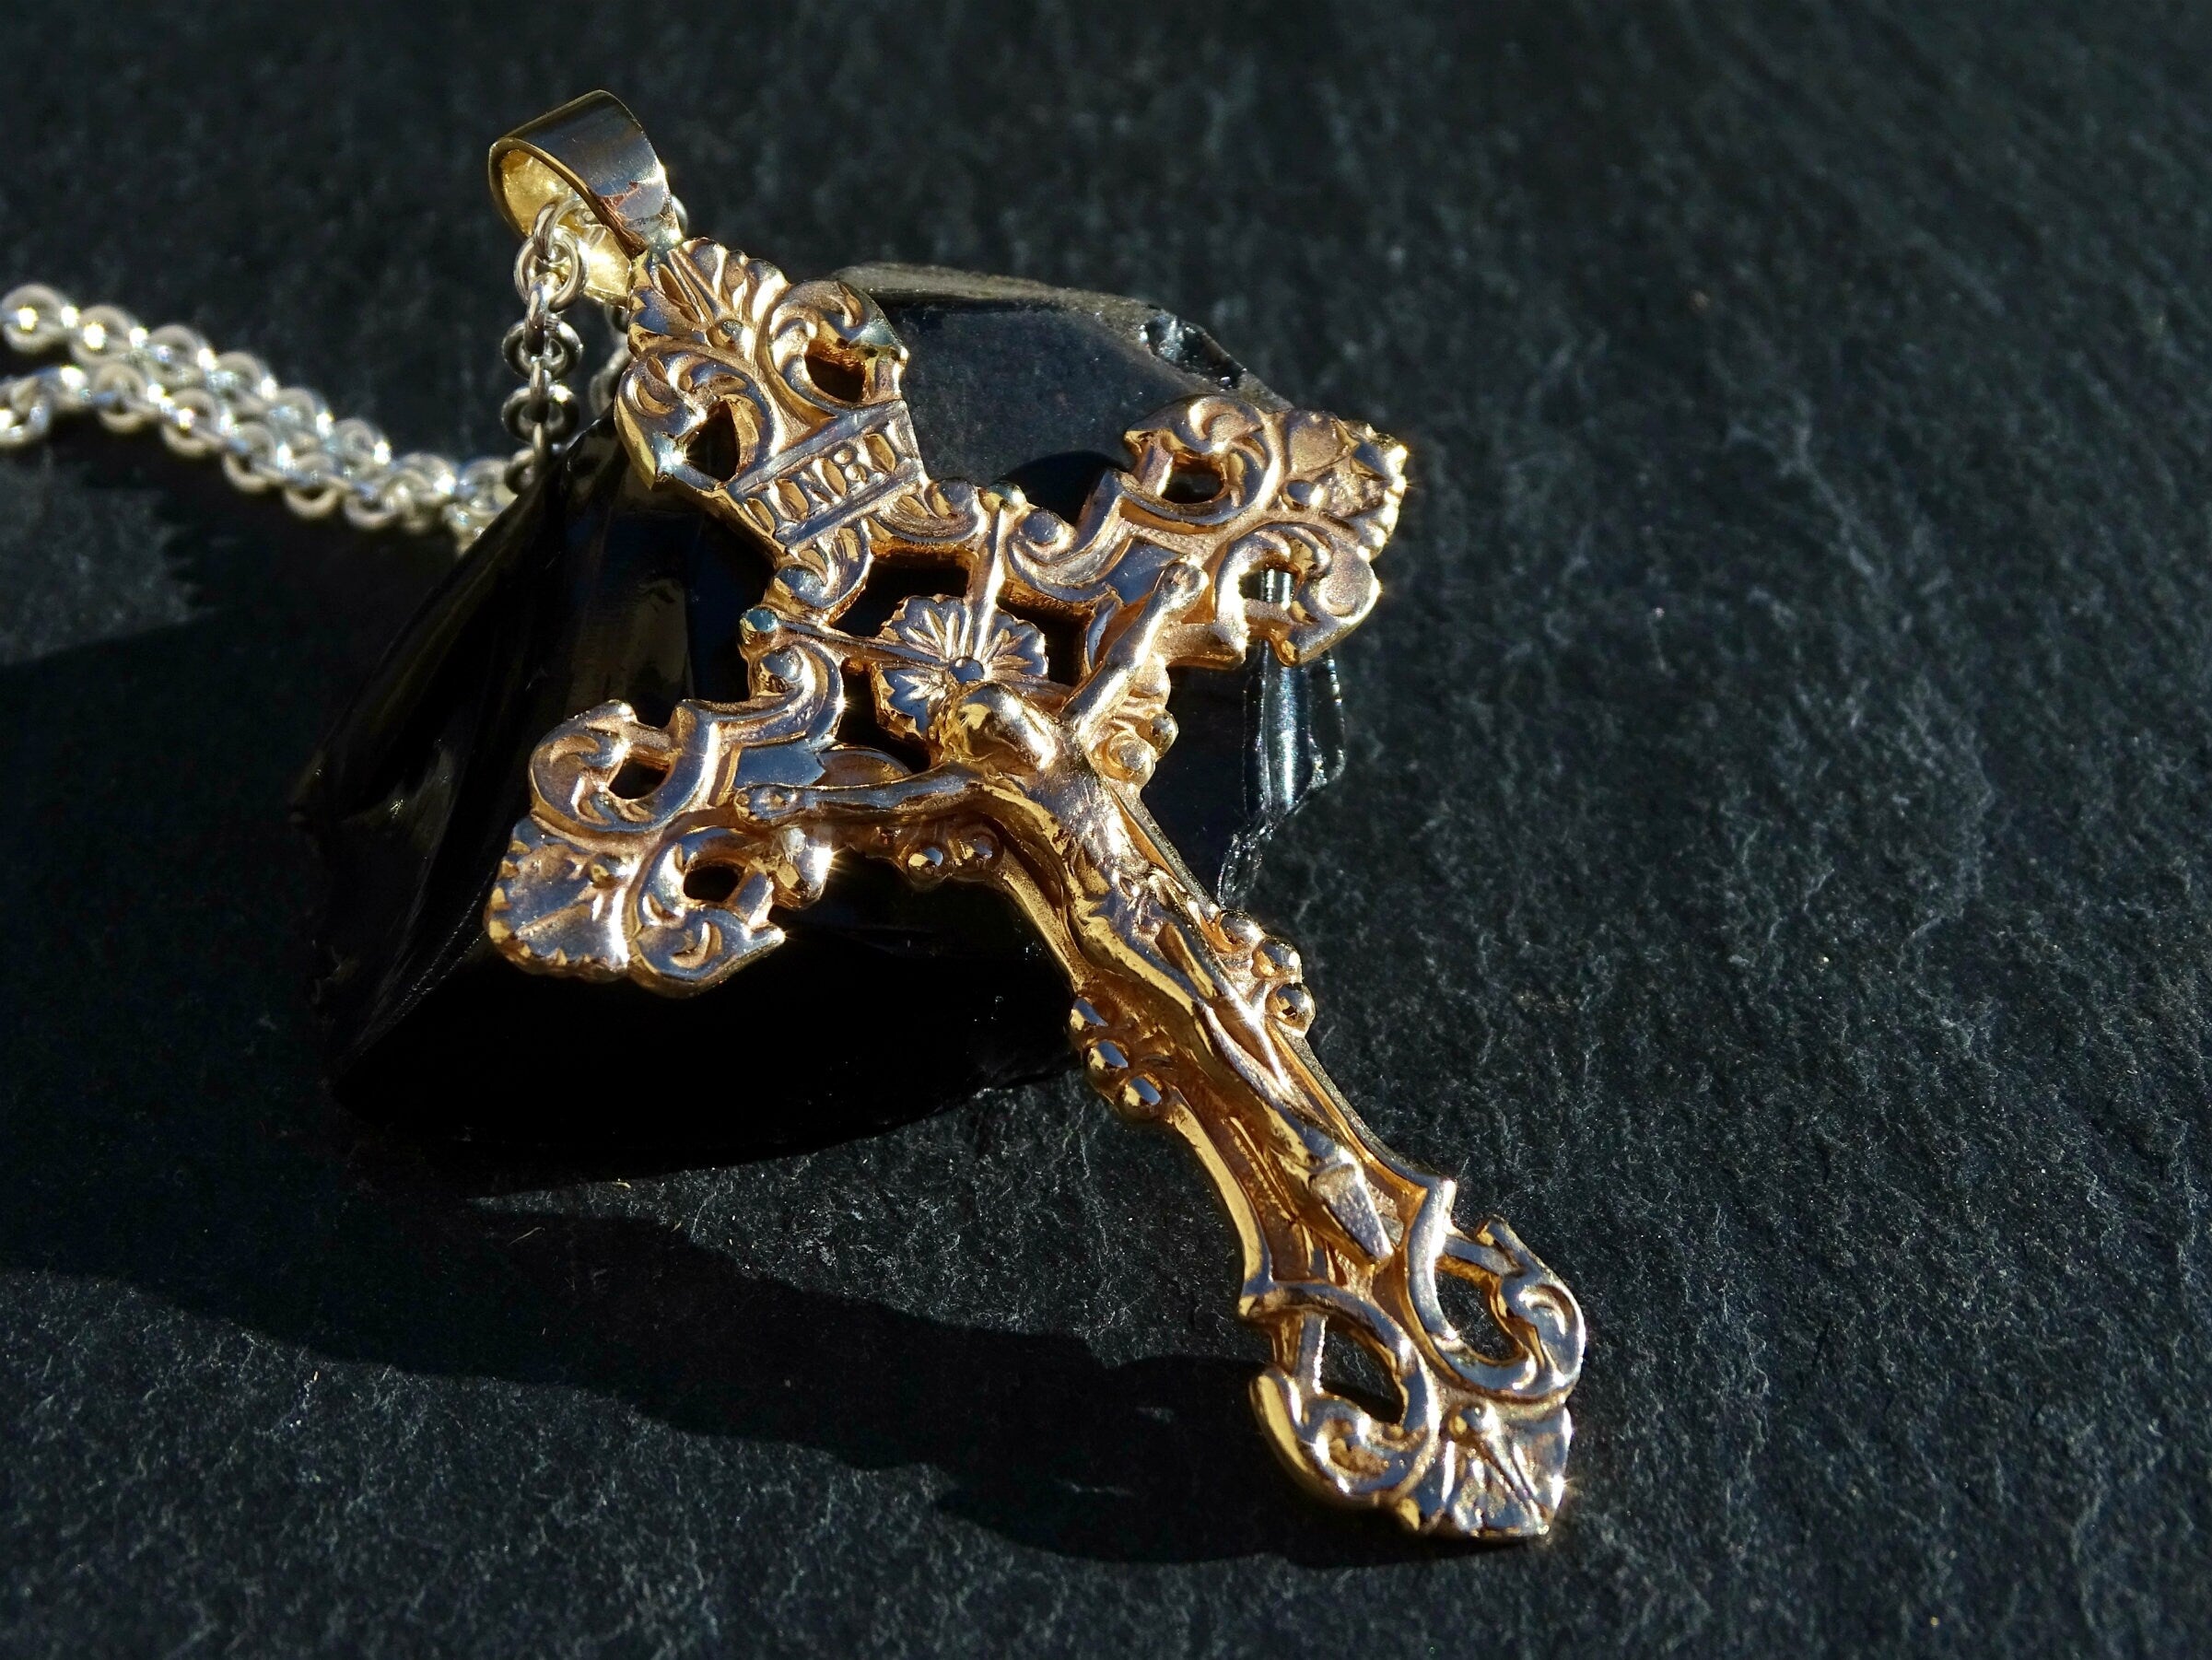 Huge Heavy Stainless Steel 3-Layered Cross Pendant Byzantine Box Chain  Necklace | eBay